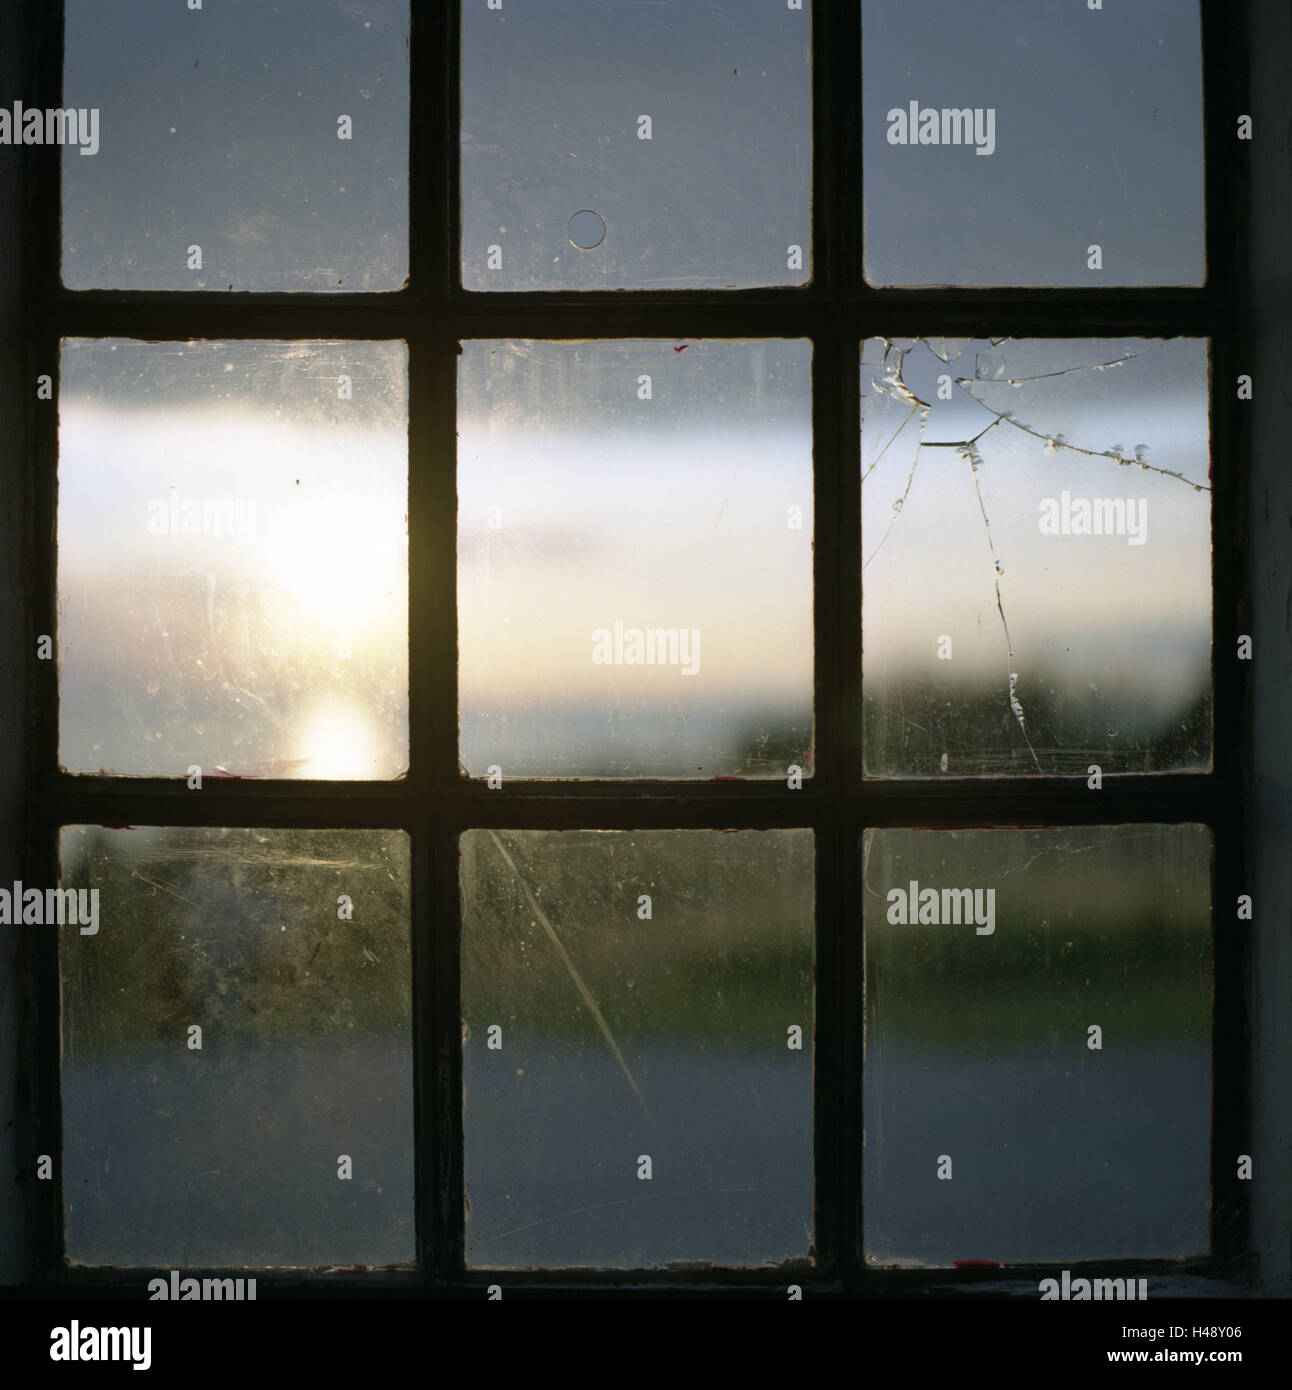 Windows, slices, broken, dirtily, dusk, coast, building, rung window, window panes, detail, cloudily, broken, shattered, hole, empty, view, view, clouded, exit, unoccupied, melancholically, nobody, sea, oblivion, sundown, blur, inside, Stock Photo